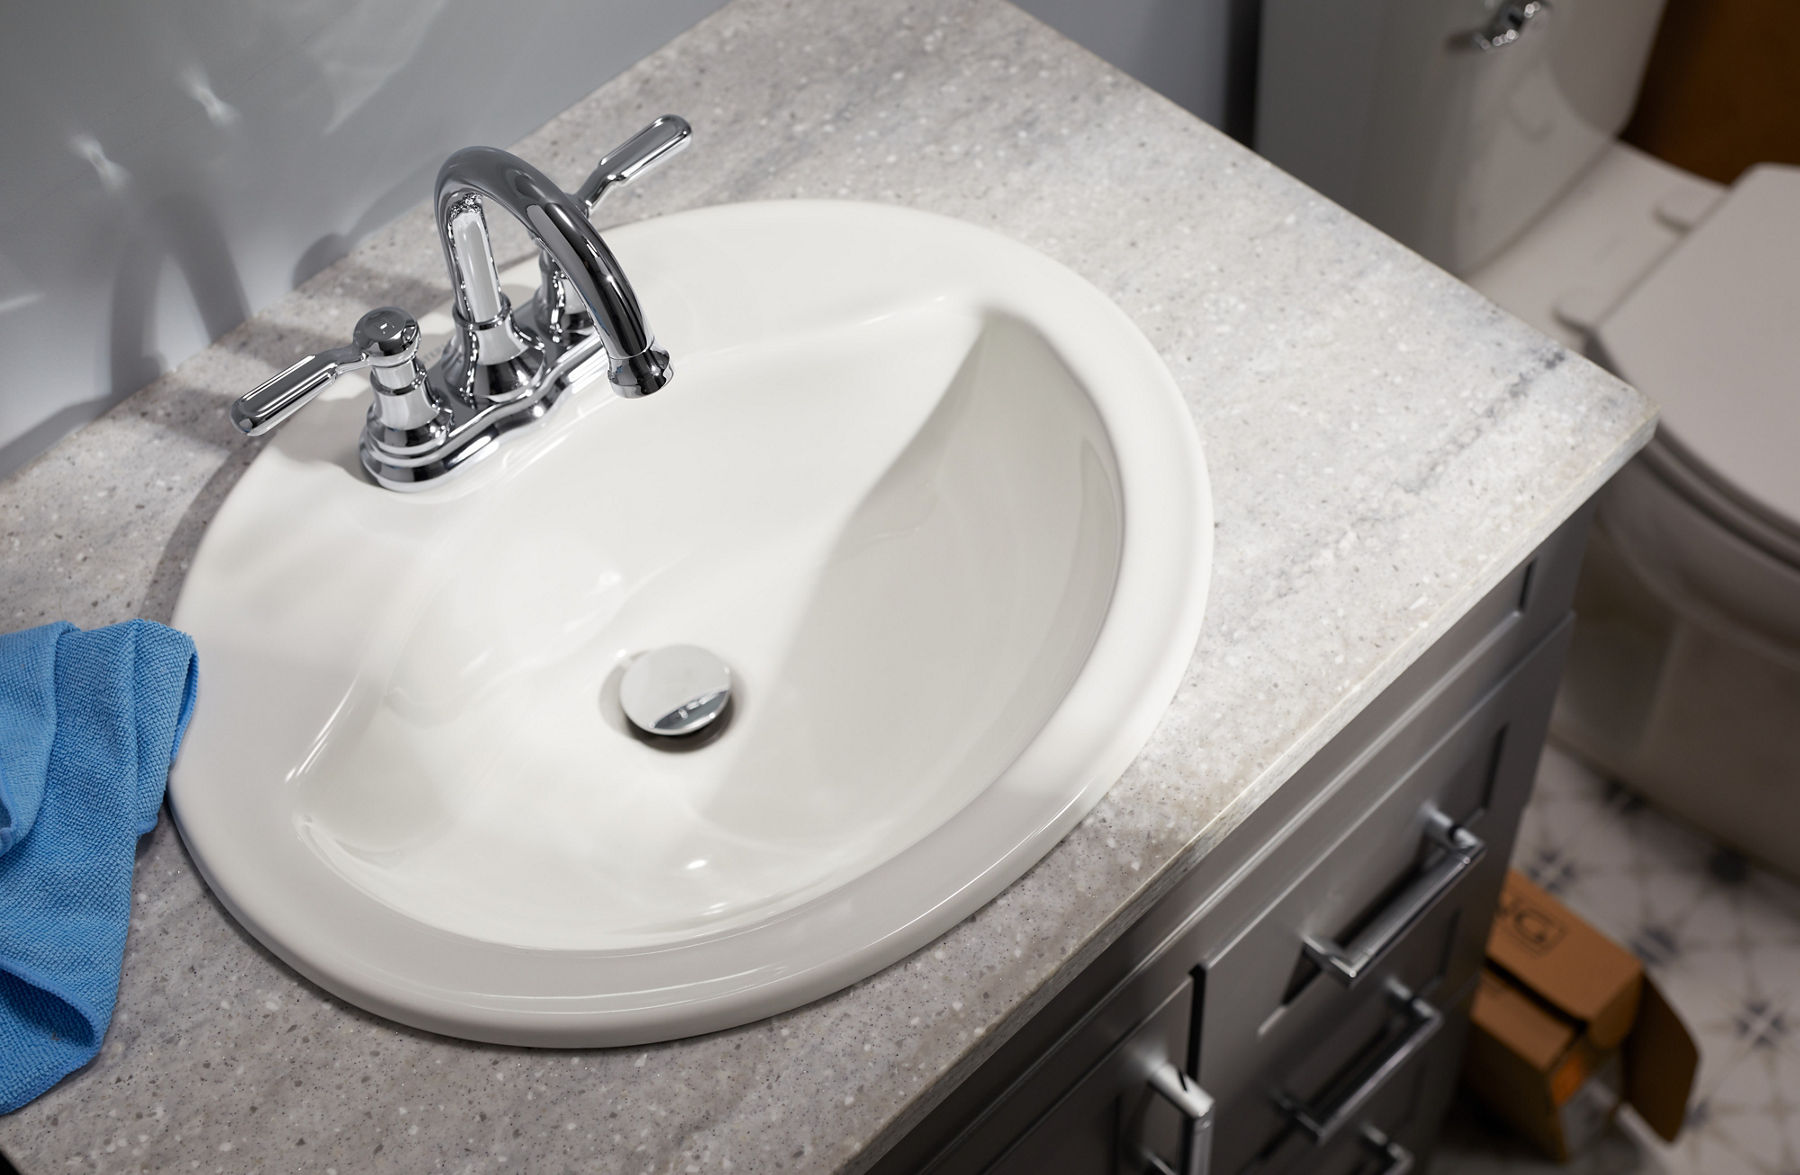 Overhead view of a white enameled cast iron sink with a chrome centerset faucet, on a gray stone counter top.